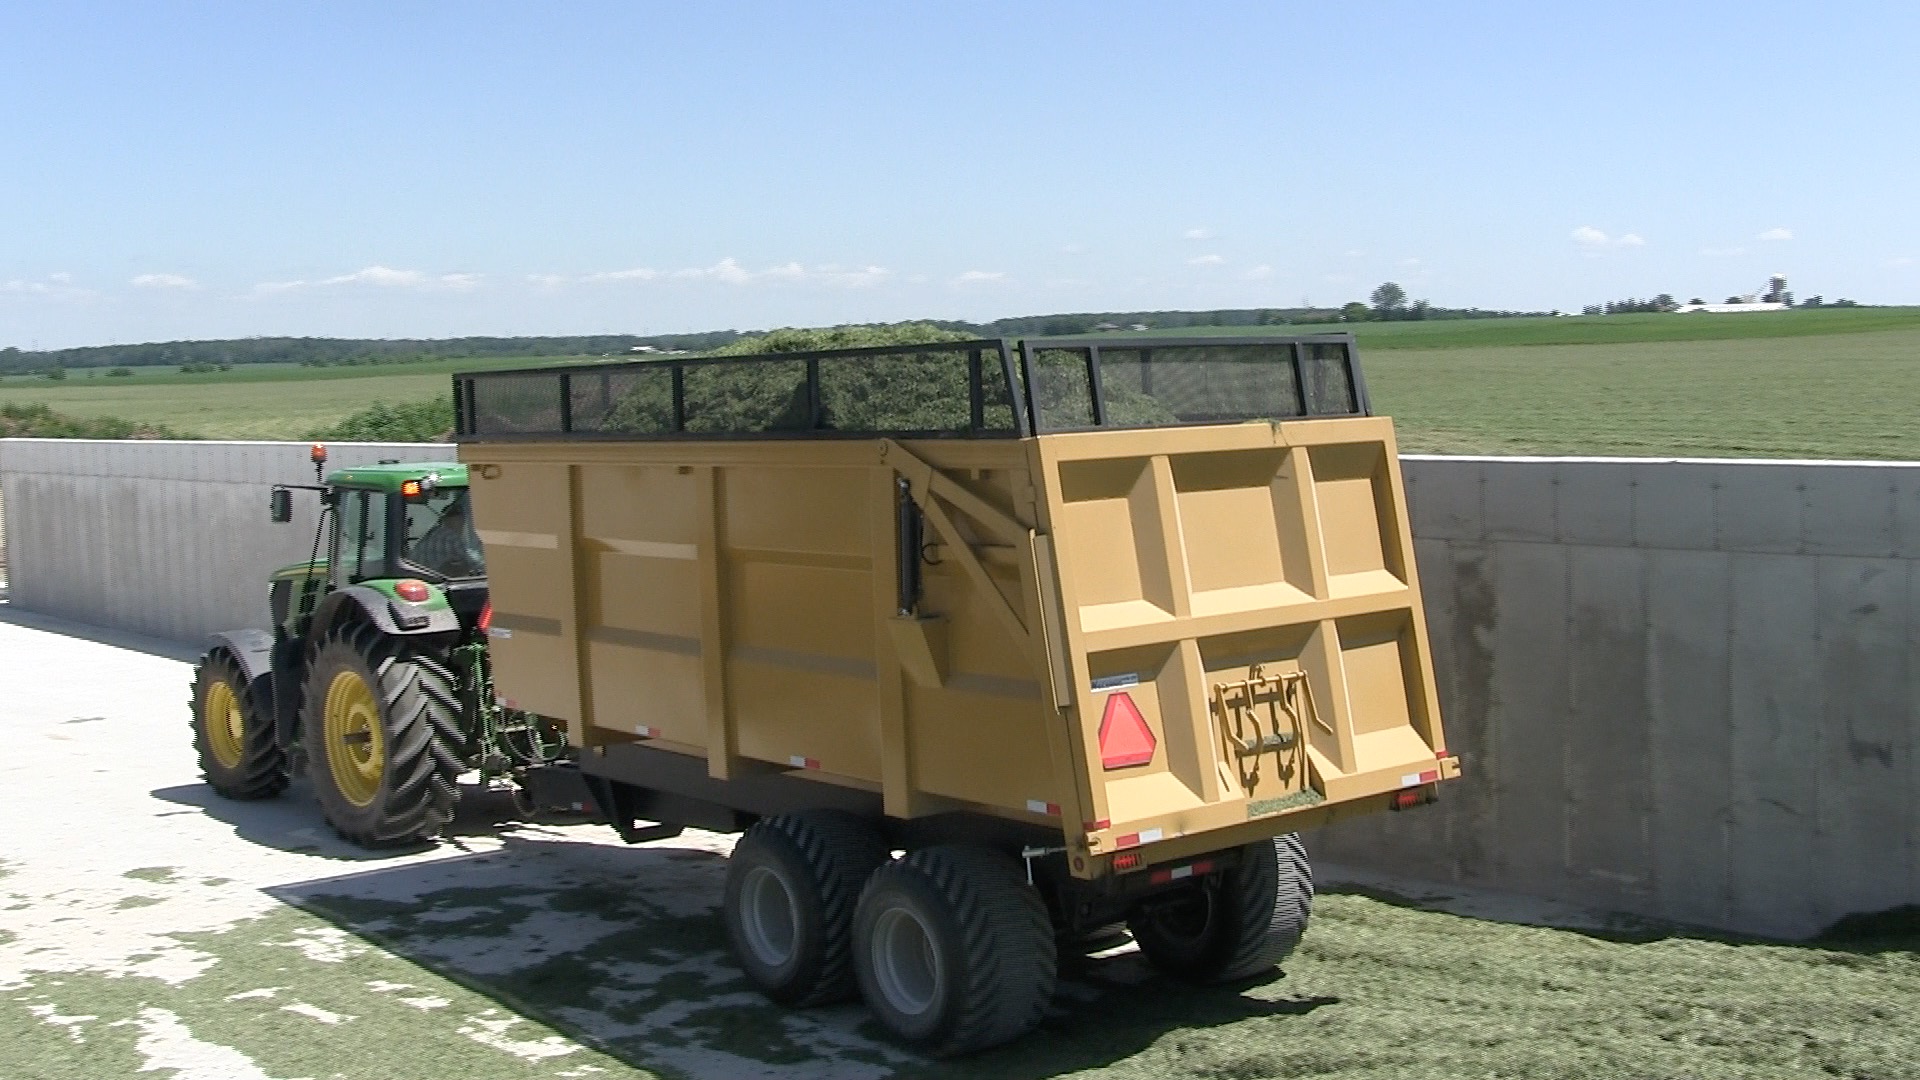 A side shot of the 20 ton silage dumper trailer dumping hay silage